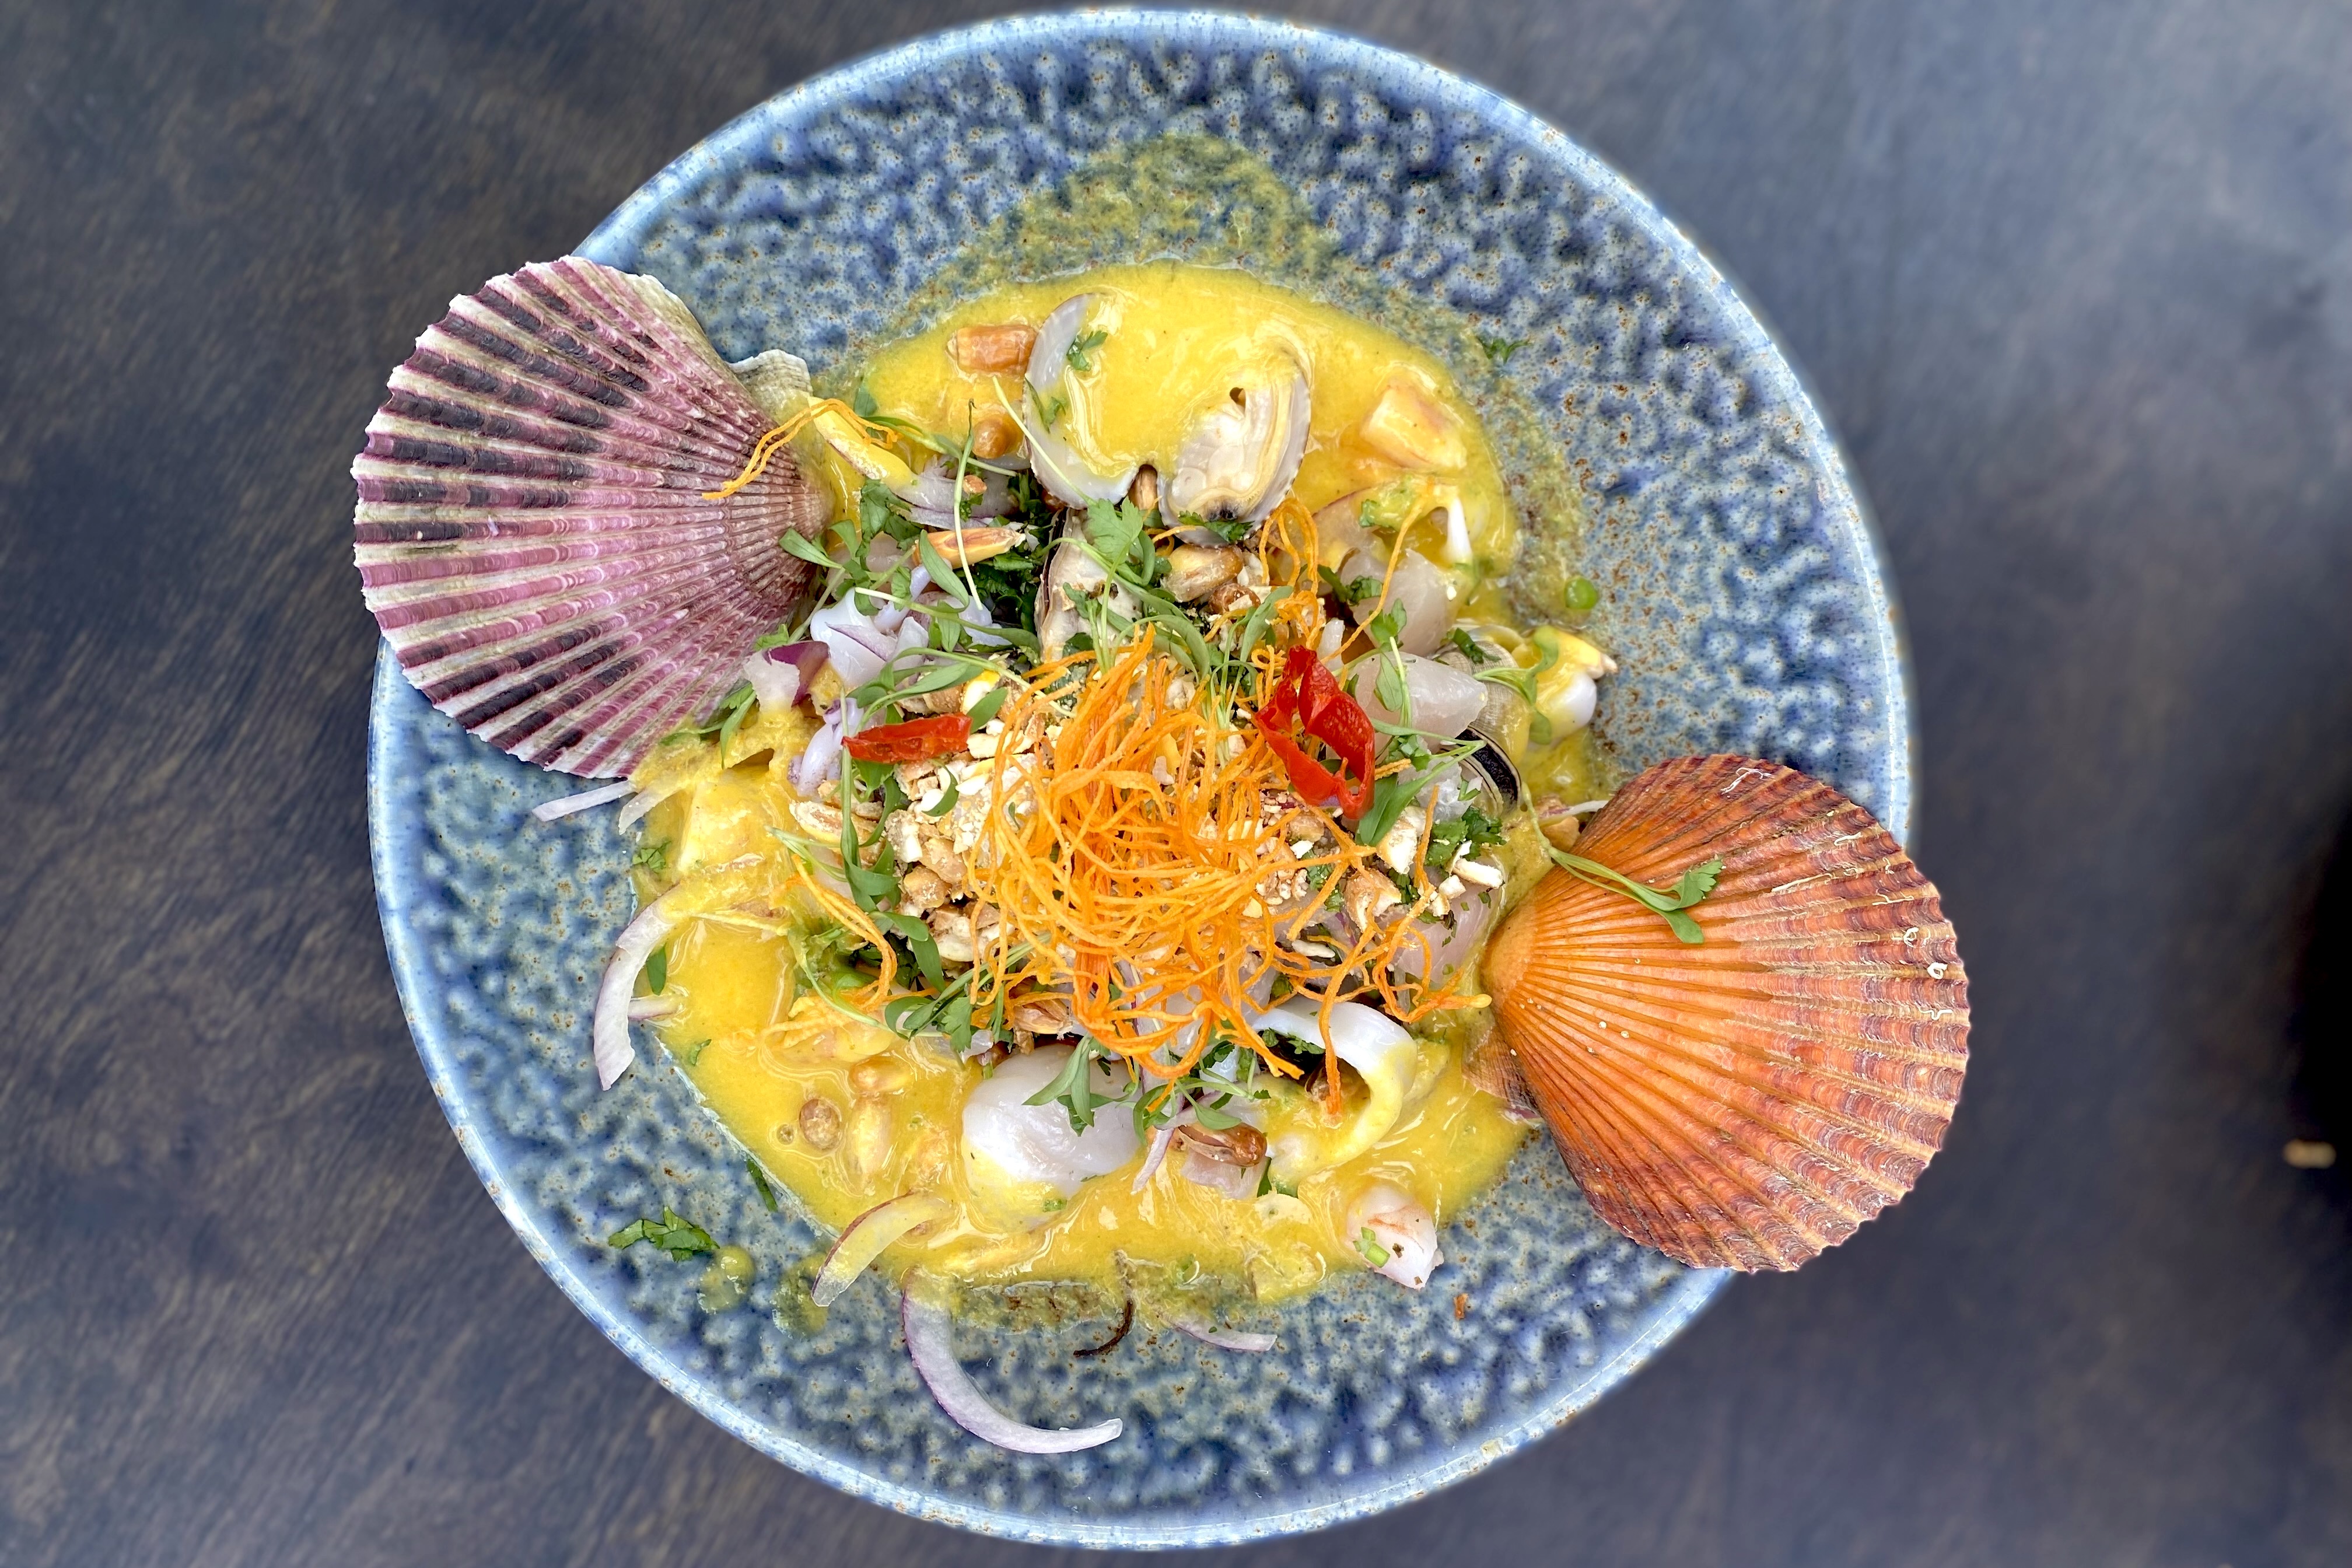 A blue bowl filled with ceviche in a yellow sauce with two seashell accents, one orange and one purple. 